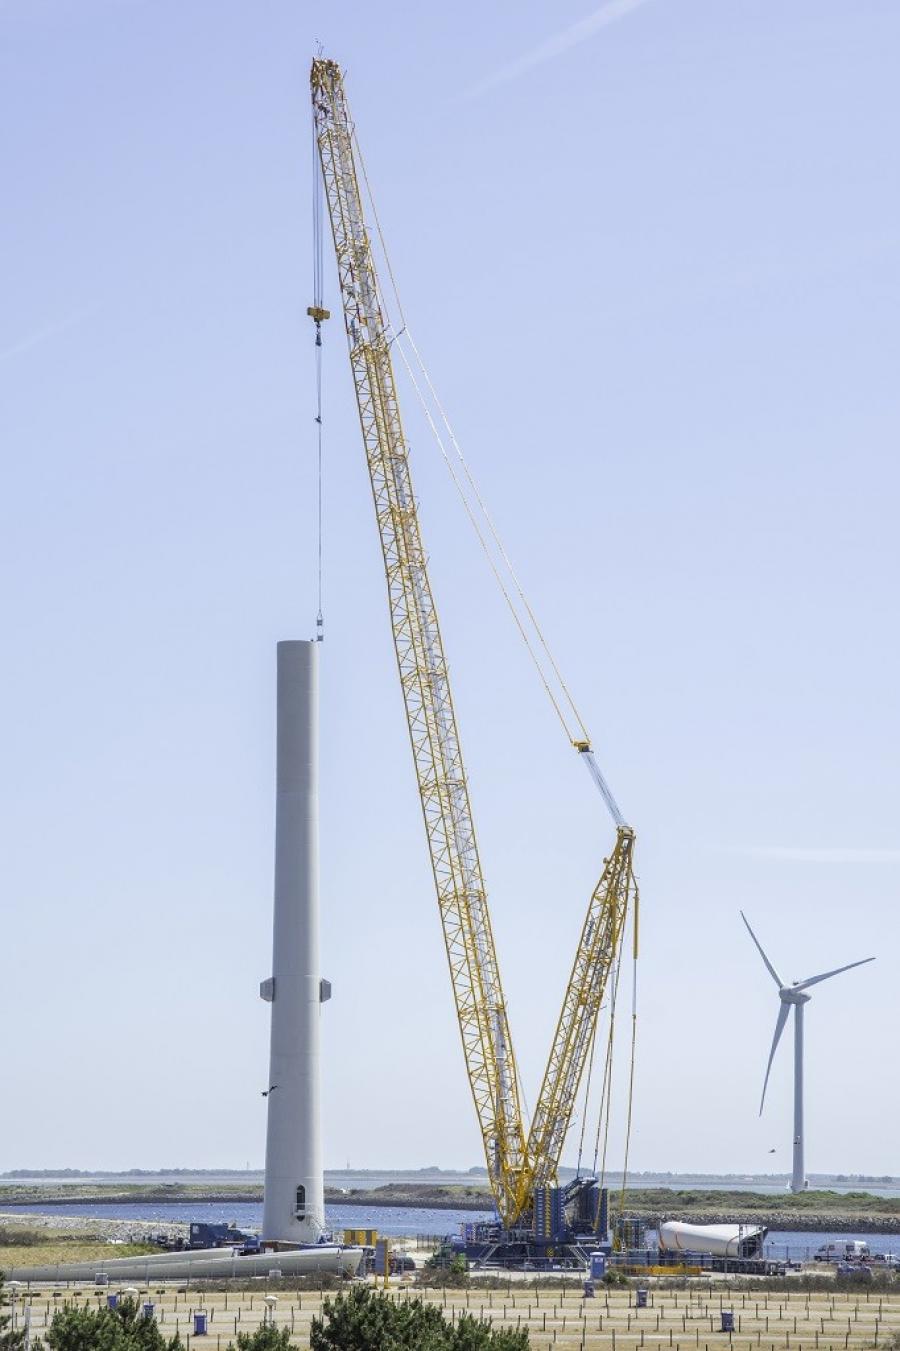 Sarens used a separate crane for each wind turbine, so as to complete the job as quickly as possible, with the units being a Demag CC 3800-1 crawler crane and a PC 3800-1 pedestal crane.